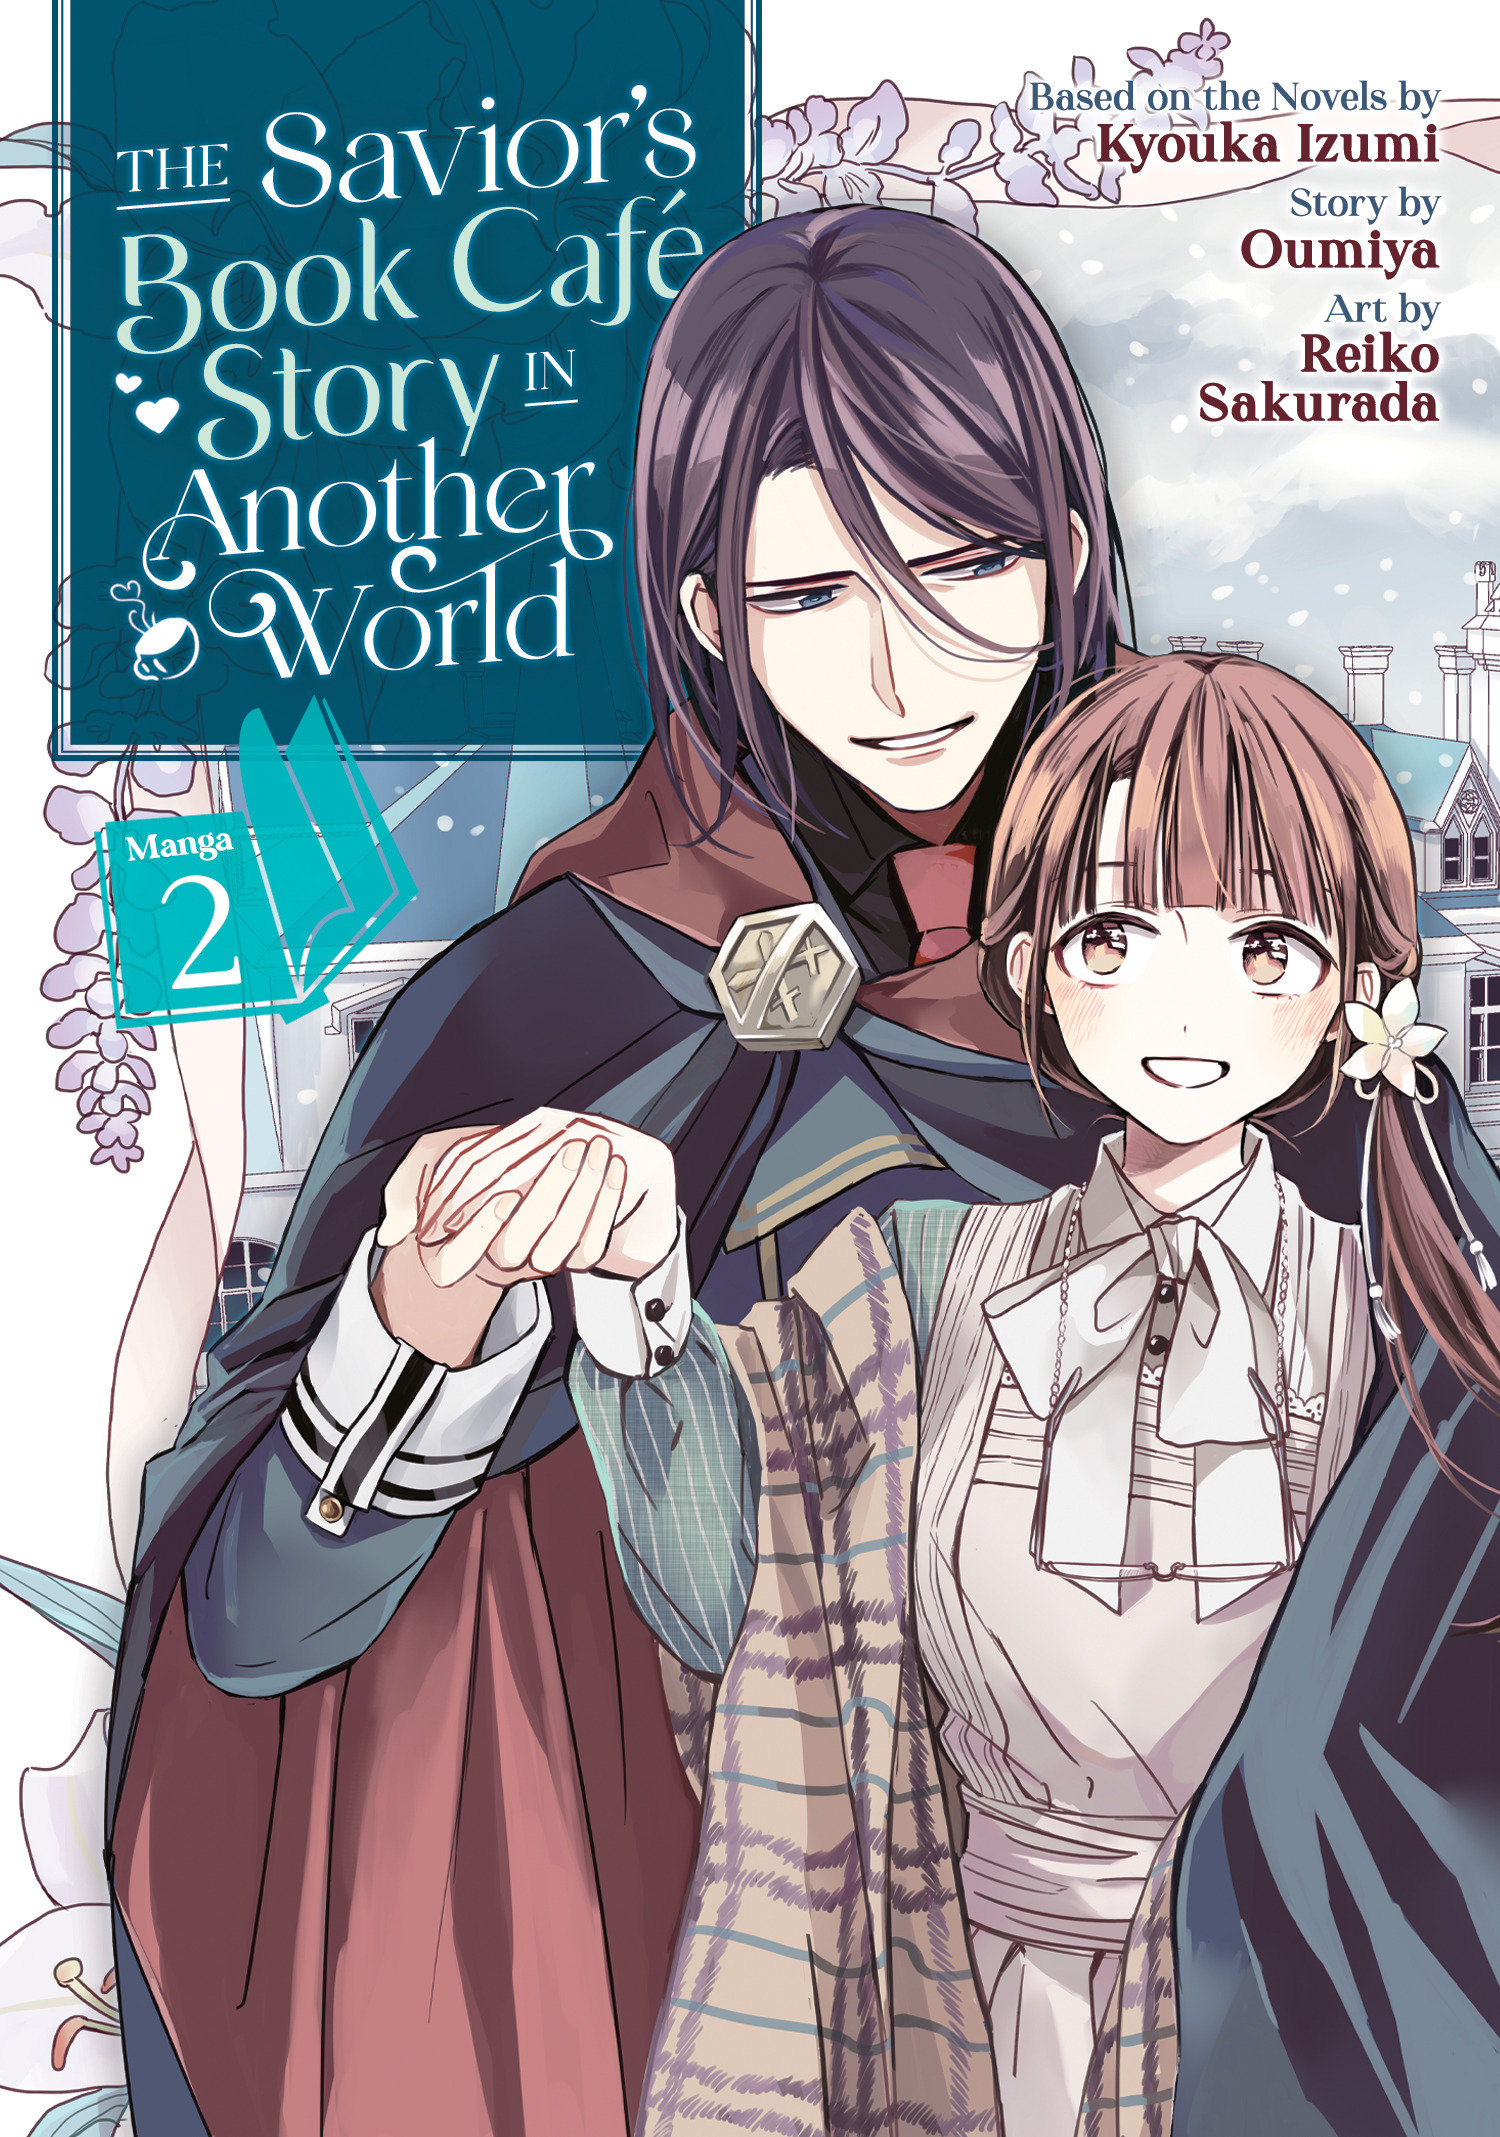 The Savior's Book Café Story In Another World Manga Volume 2